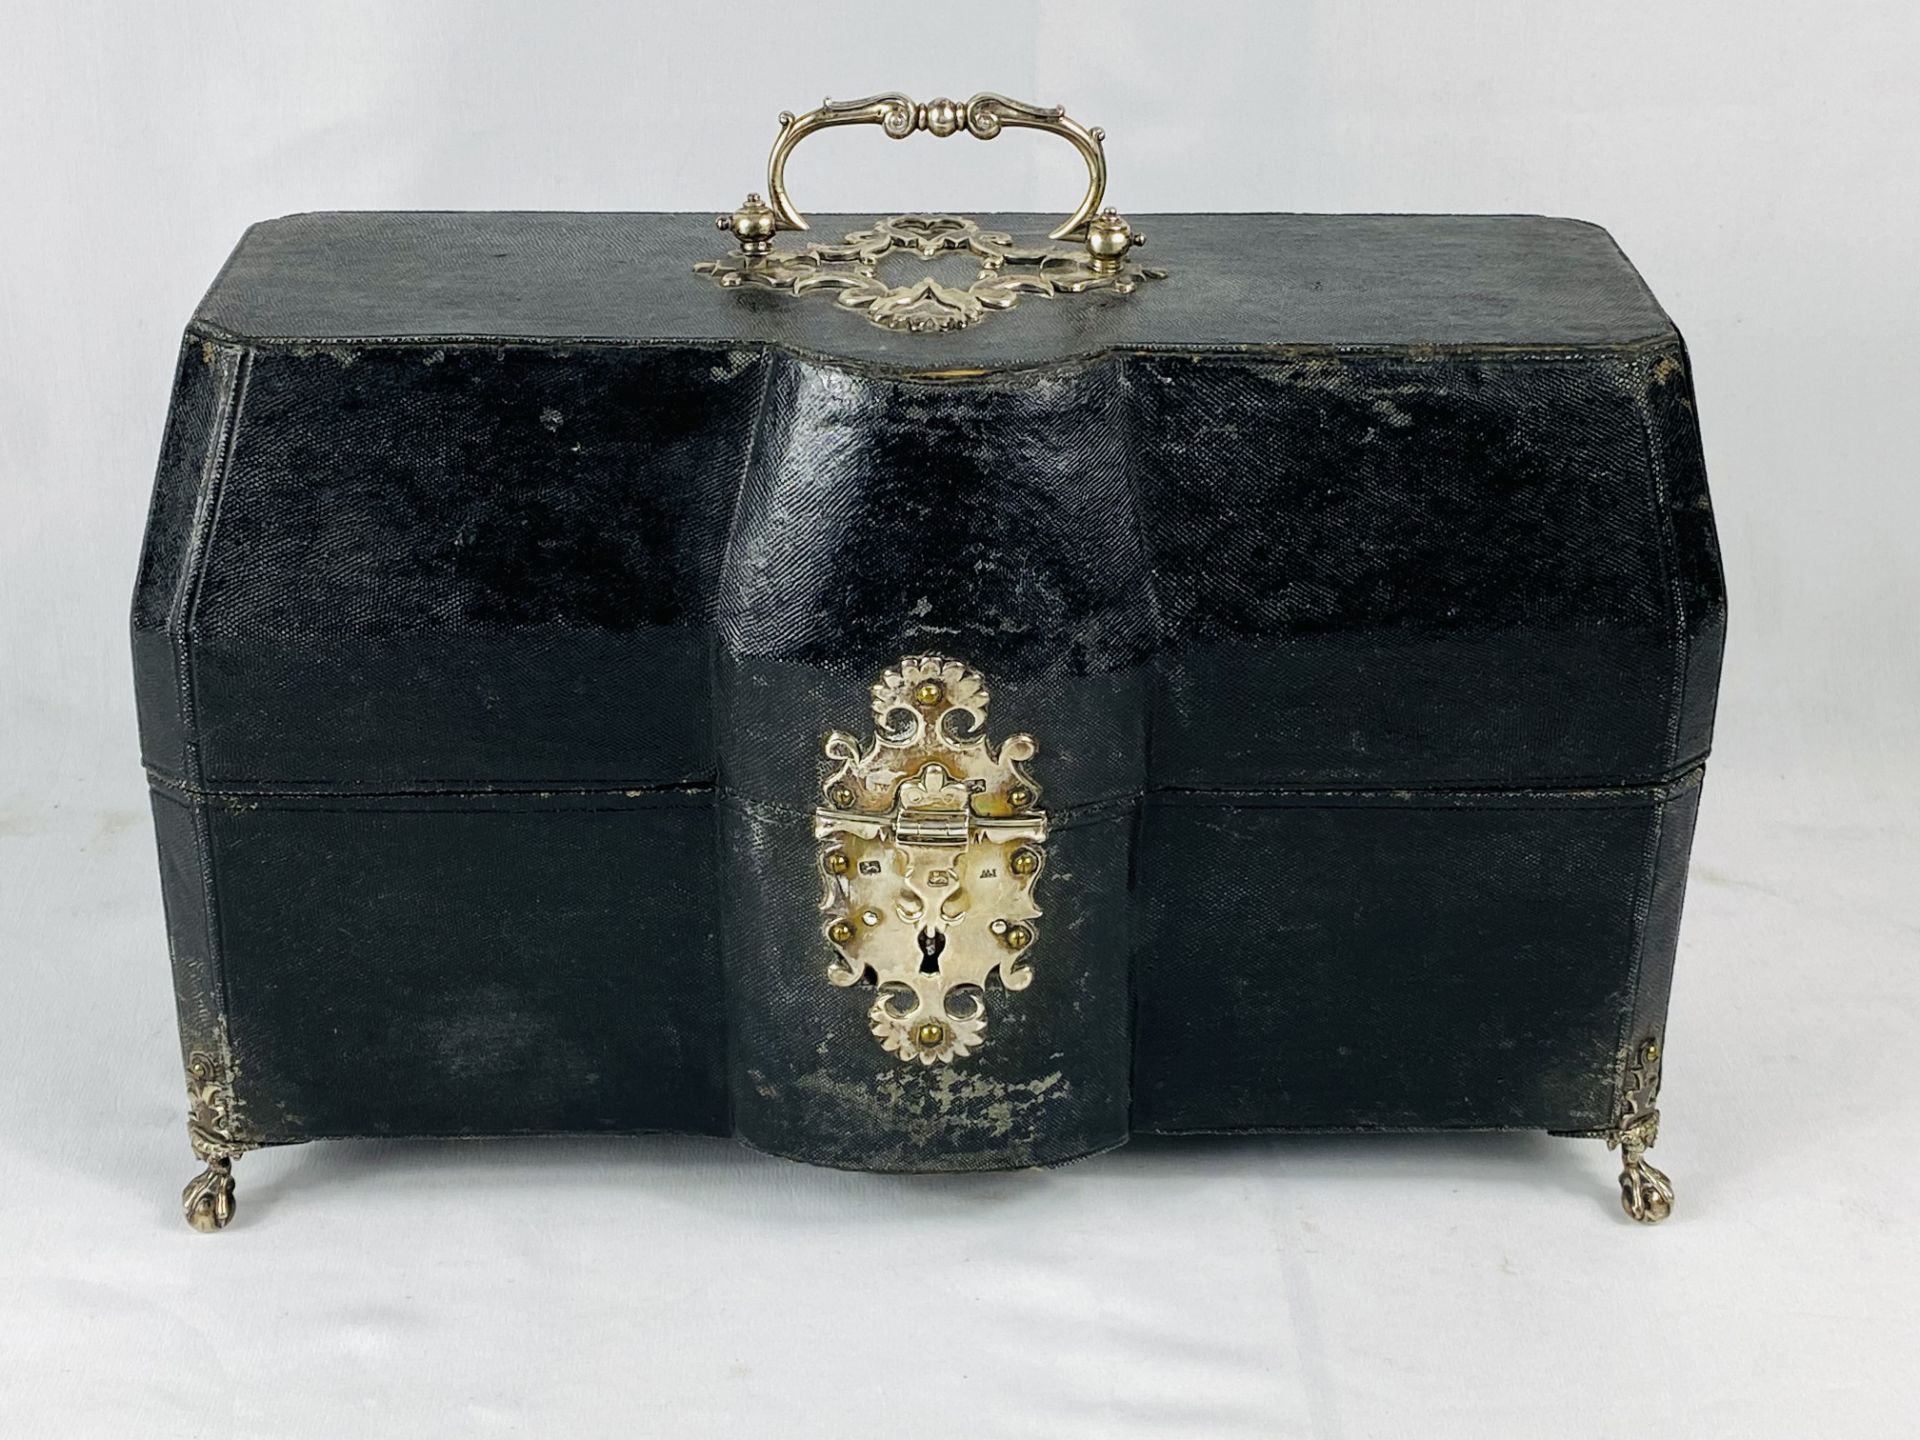 19th century bottle case with silver escutcheon and handle,